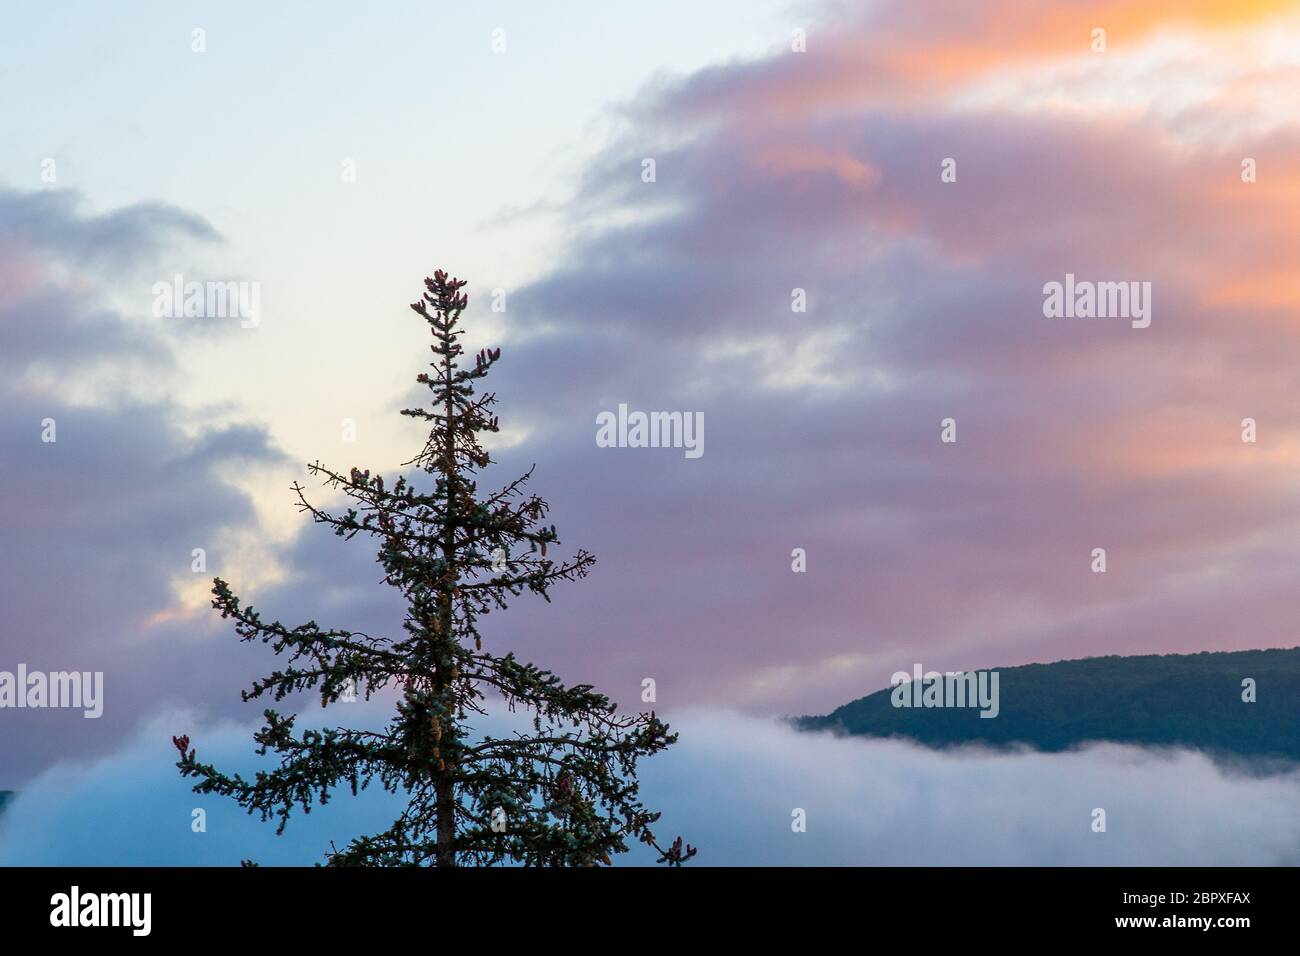 foggy tree silhouette at dusk or dawn with mountain Stock Photo